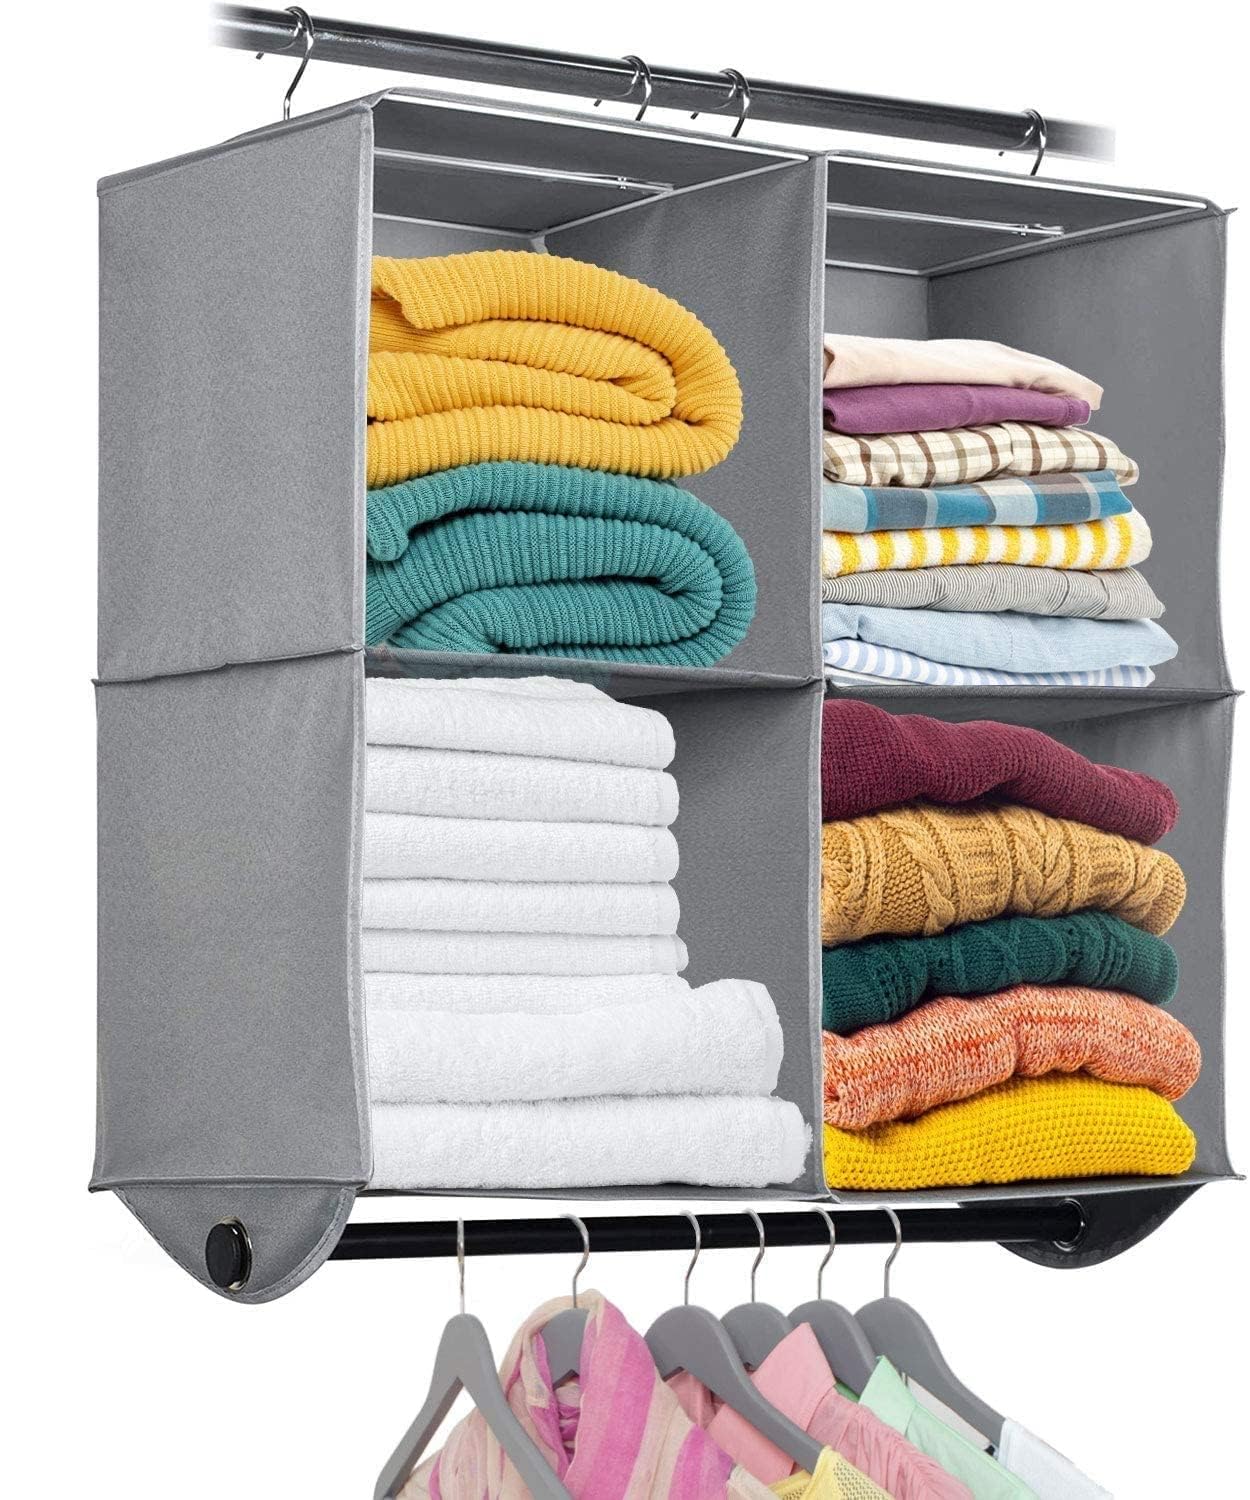 Hanging Closet Organizers with 4 Shelves - Closet Storage and RV Closet Organizer - Grey with Black Metal Rod - 24� W x 12� D x 29-1/2� H - Perfect for College Dorms  - Like New